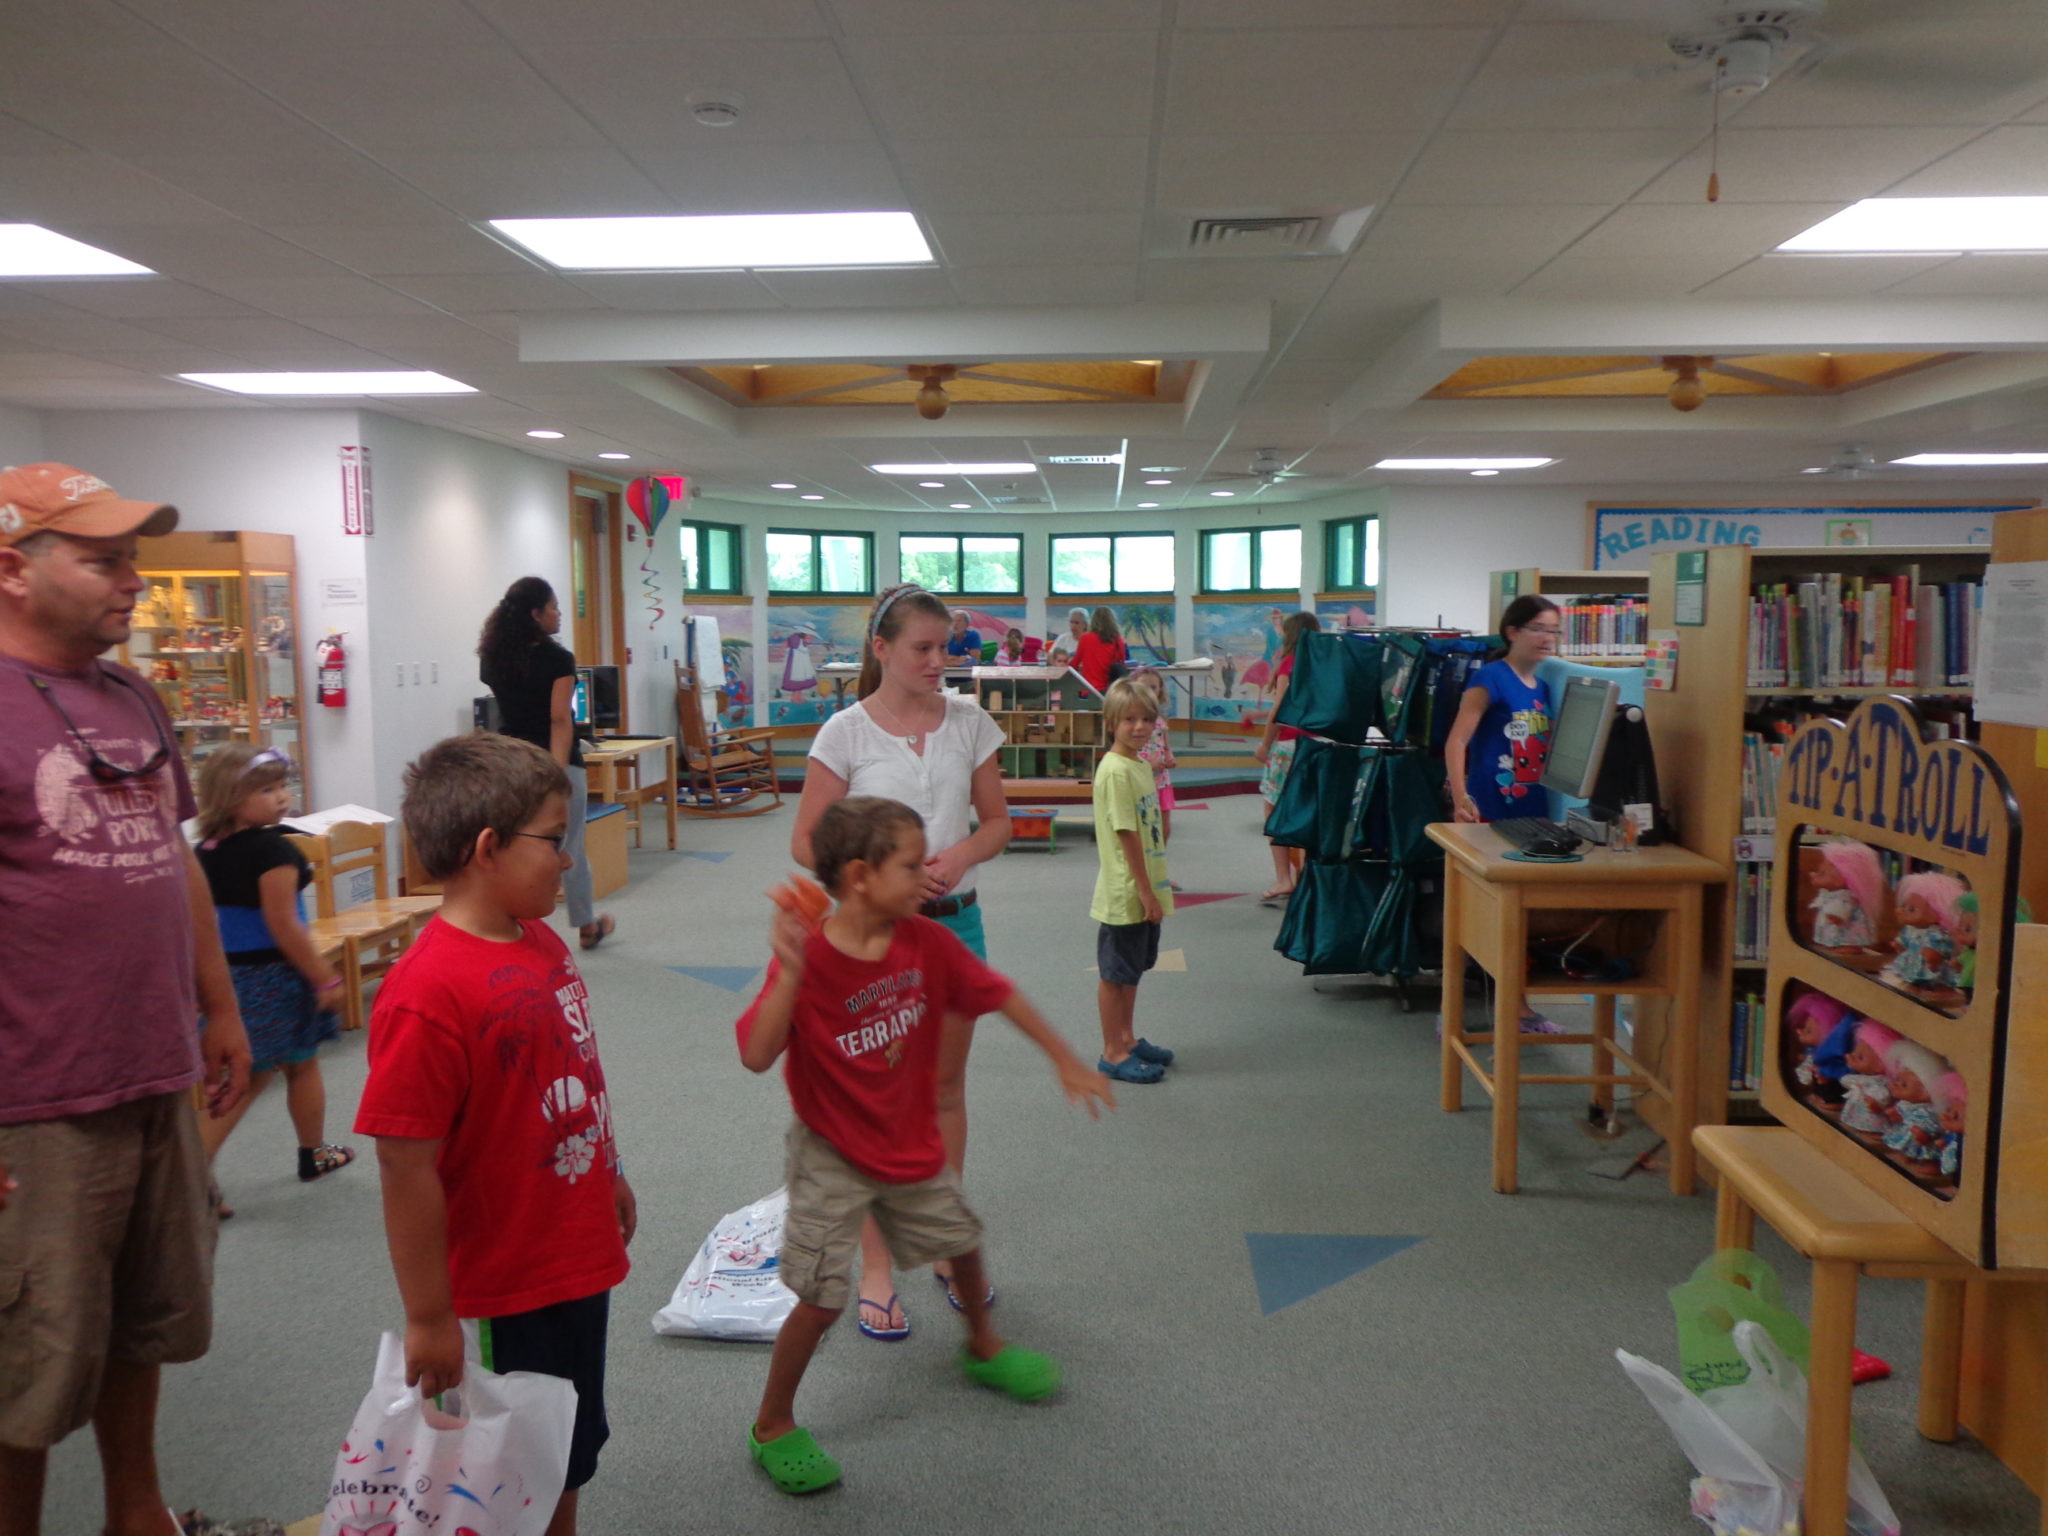 Boy throws ball as others watch in Children's area at Sanibel Public Library